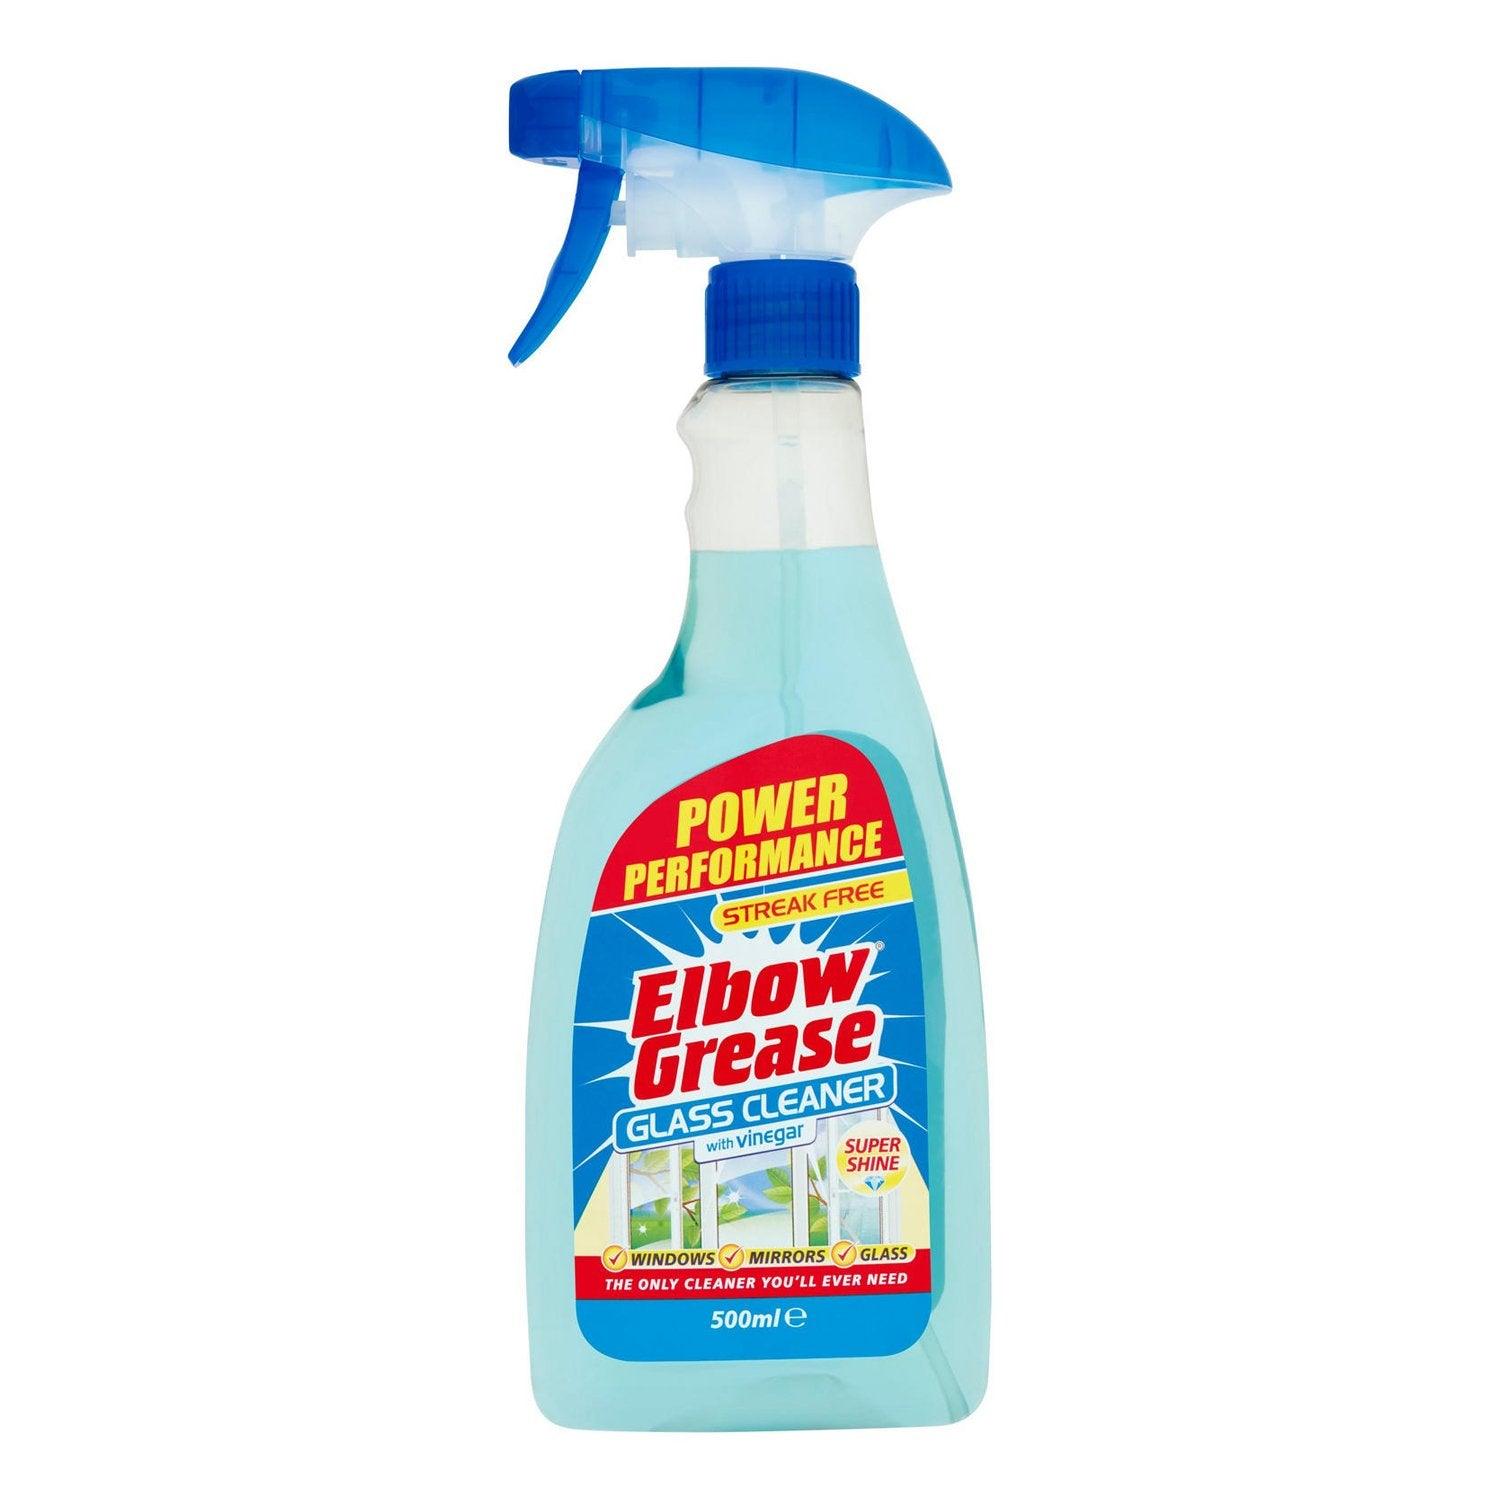 Elbow Grease Glass Cleaner 500ml - Vending Superstore